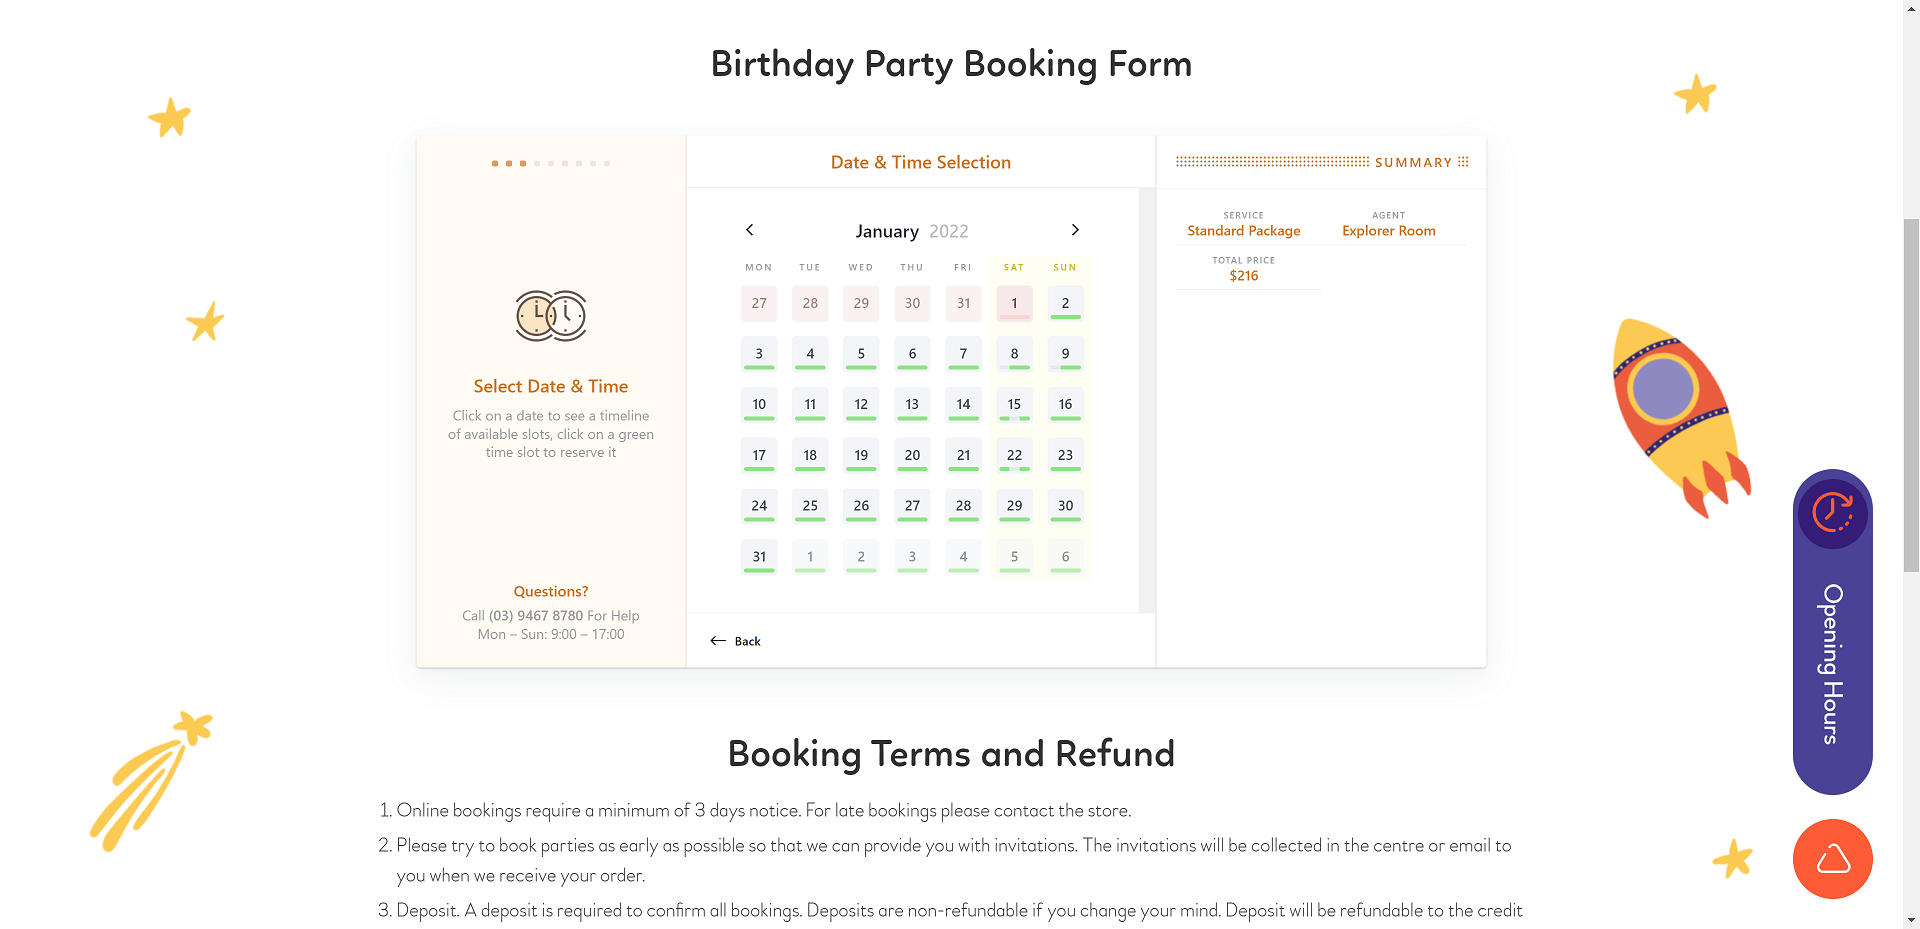 landingplaycentre birthday party booking function system by amazingstudio website design